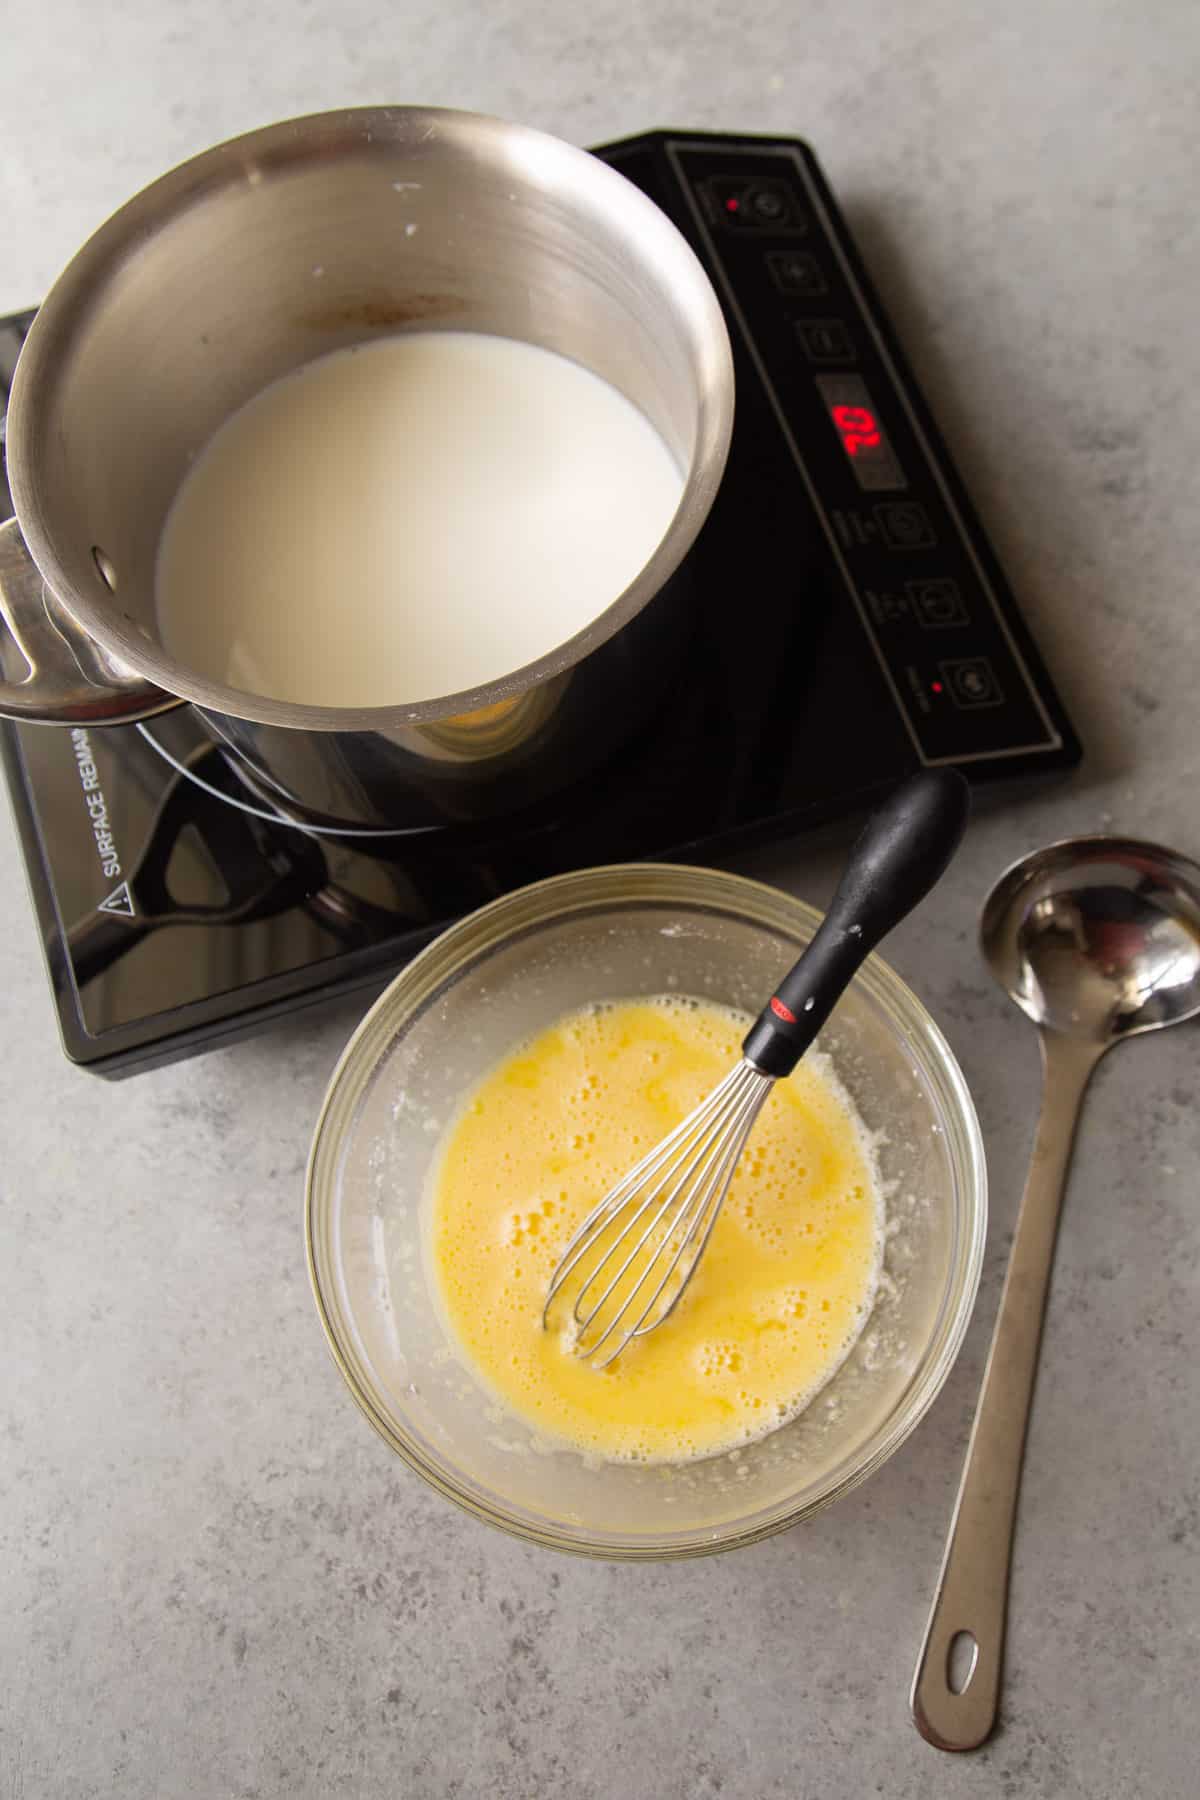 pastry cream set up with induction burner, pot, egg mixture, and ladle.